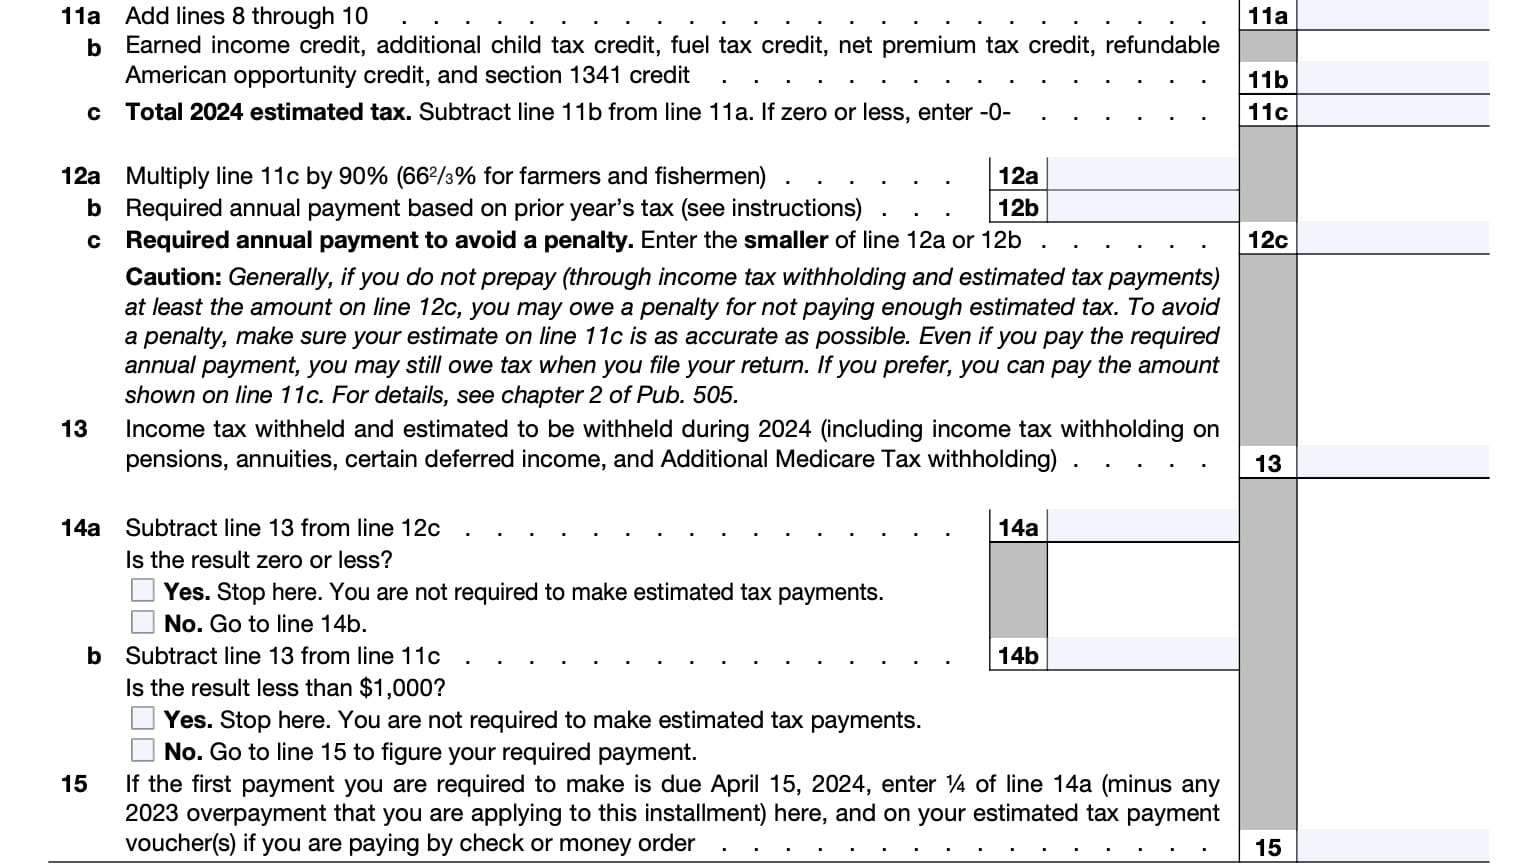 estimated tax worksheet, lines 11a through 15